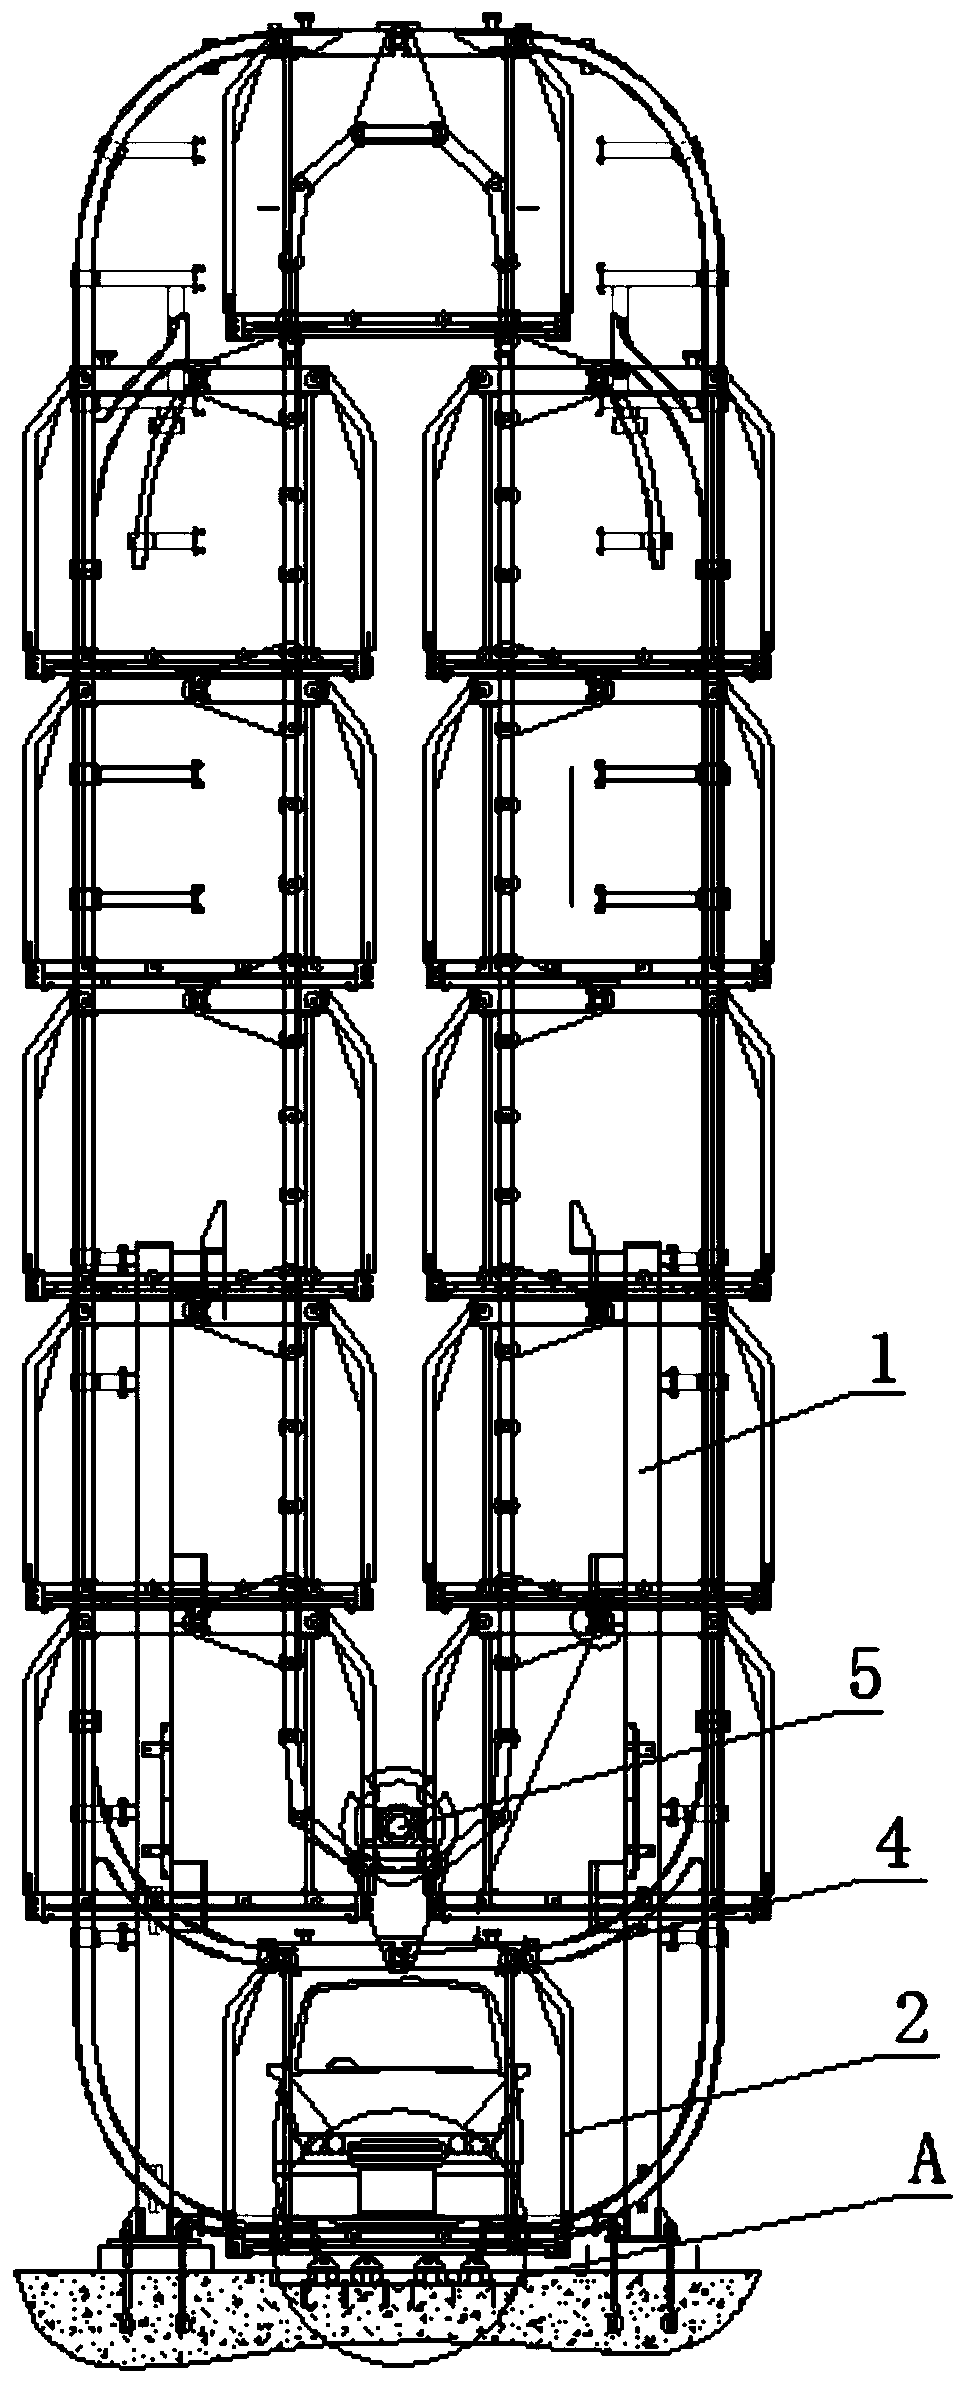 Car stabilizing device for vertical circulating garage